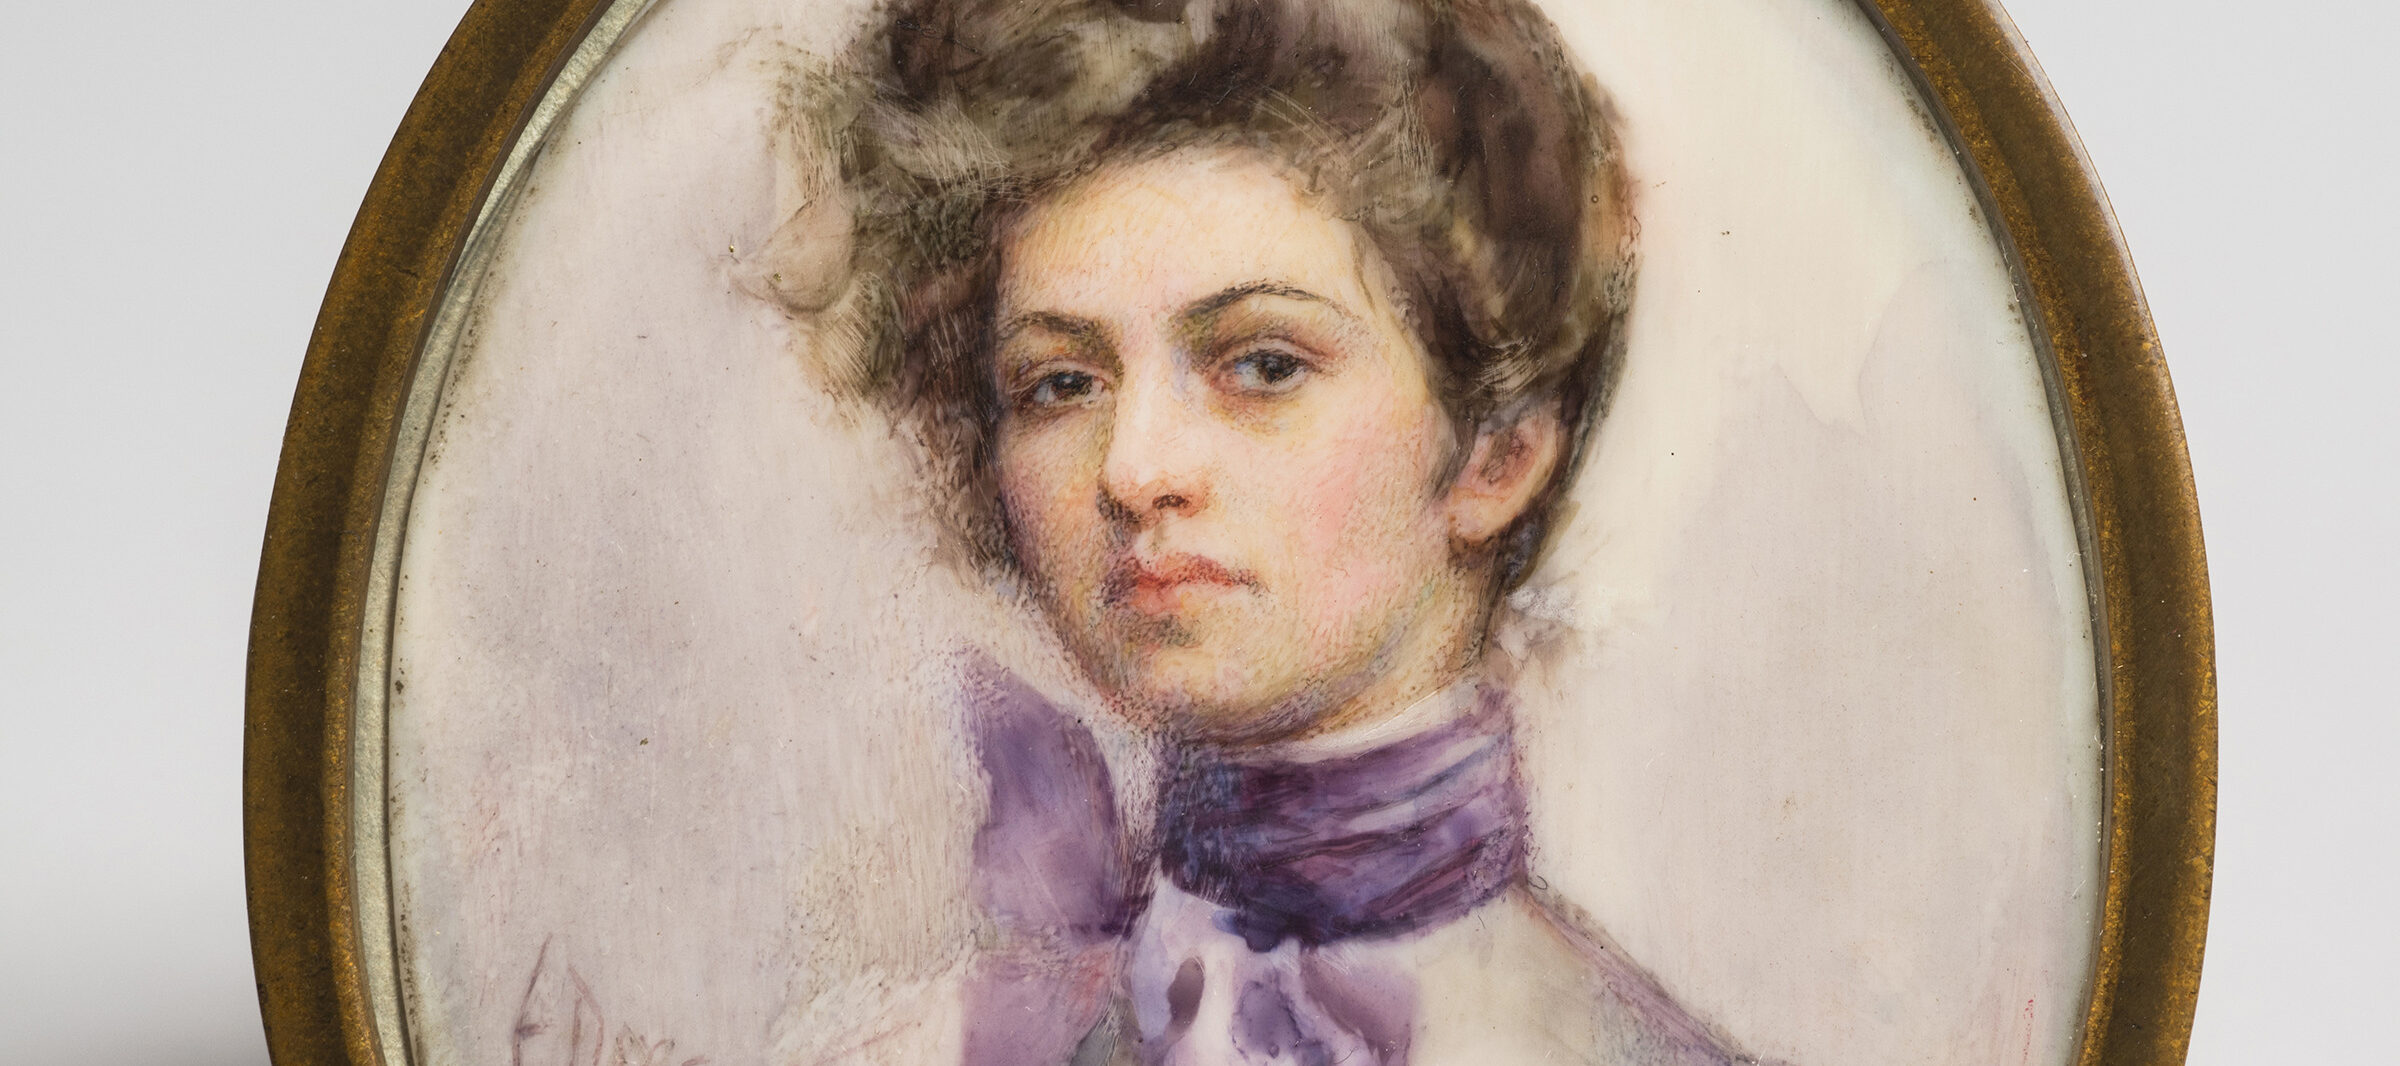 Miniature half-portrait of a light-skinned woman, set in an oval-shaped brass frame, gazing confidently at the viewer.  The woman is wearing a Victorian-style white blouse with a purple scarf tied in bow around her neck, her brown hair loosely piled atop her head.